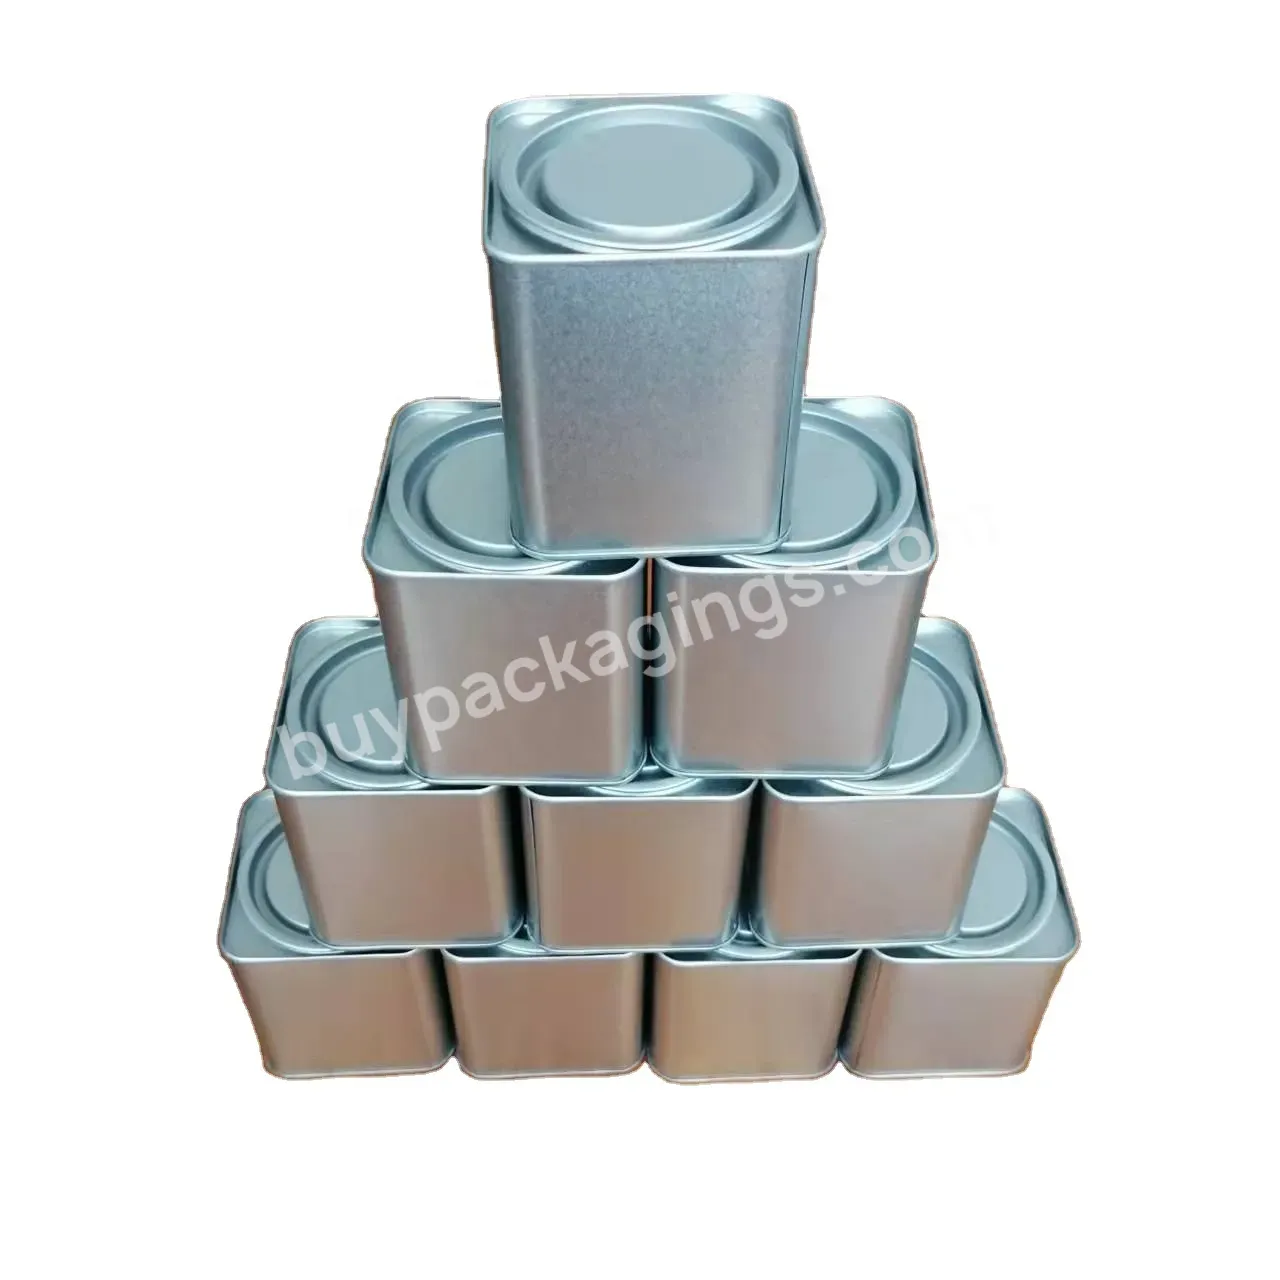 Ready To Ship Wholesale 3 Inch Square Metal Cans With Lids For Air Tight Square Metal Tins 76*76*90mm